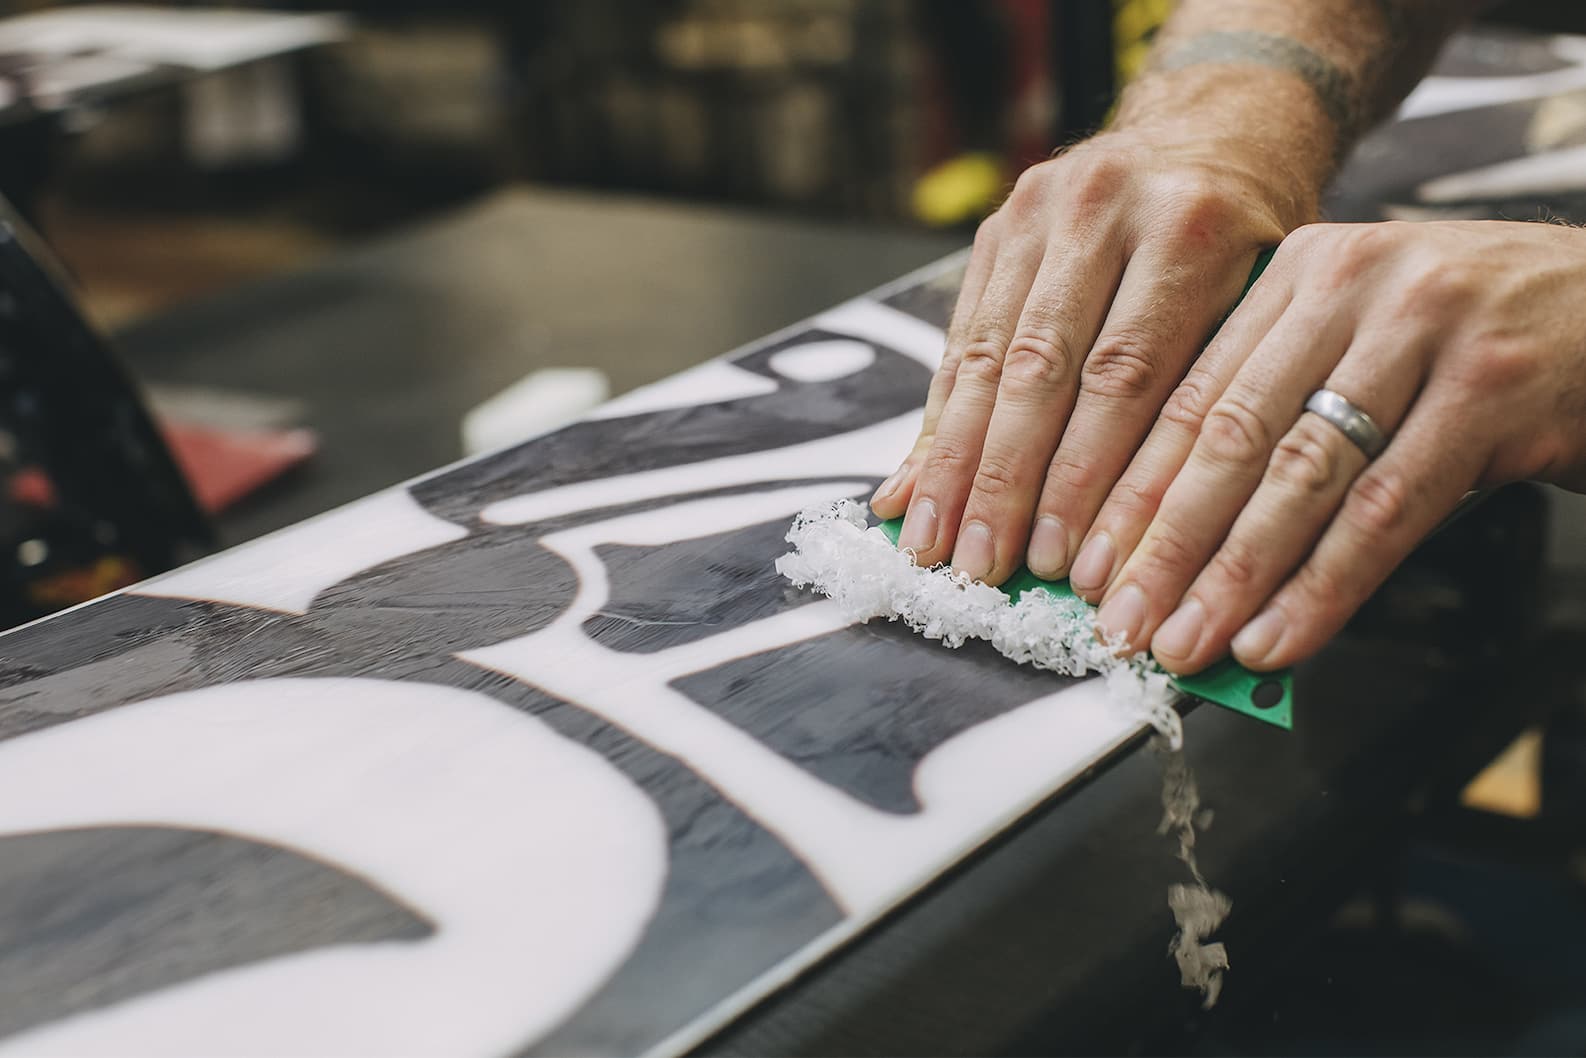 How to Wax a Snowboard (and other Basic Maintenance) | Burton Snowboards